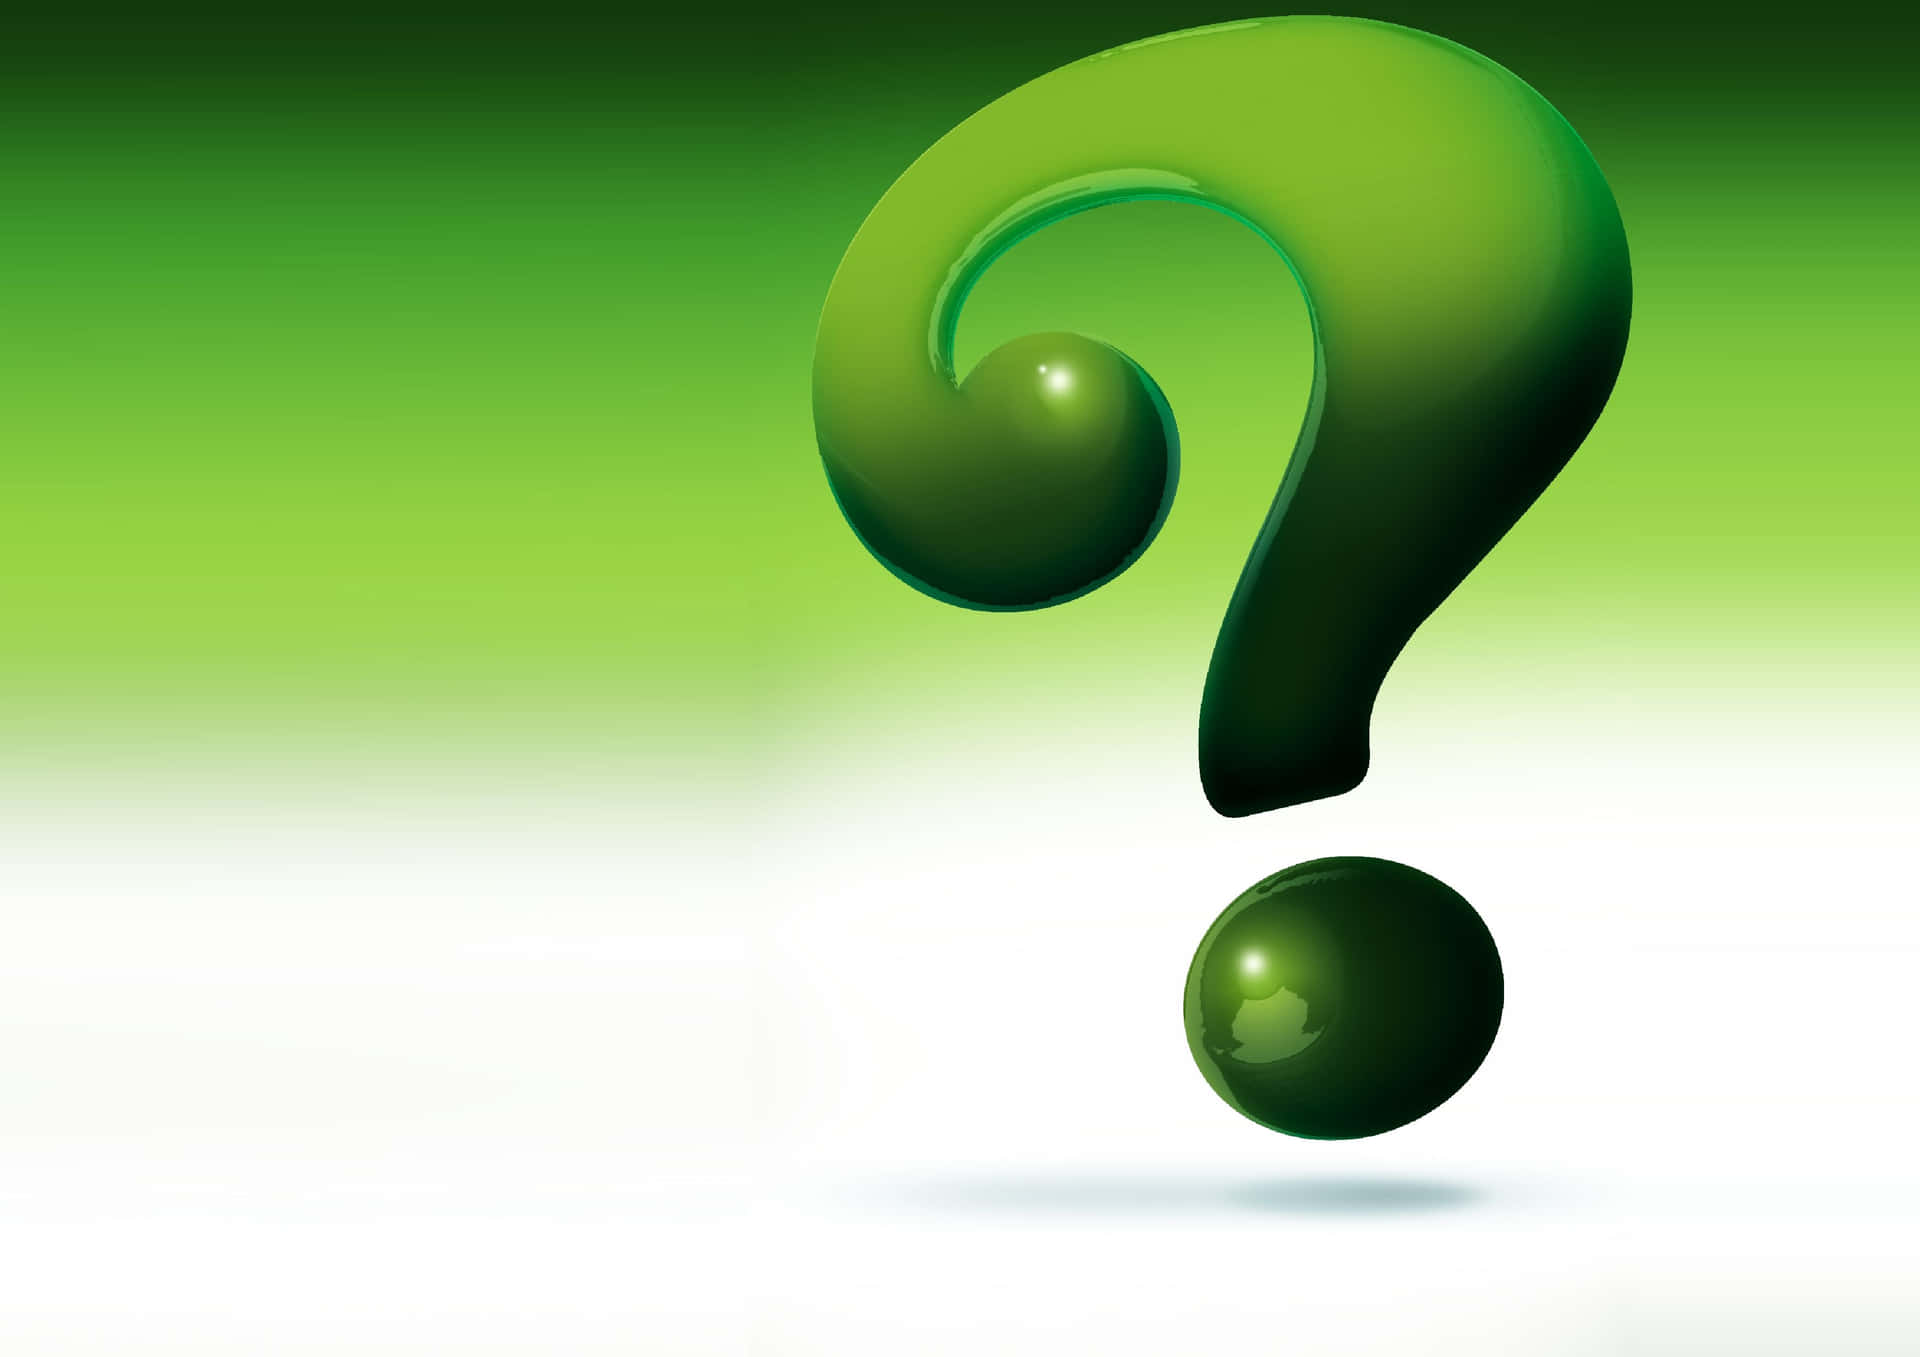 question icon green